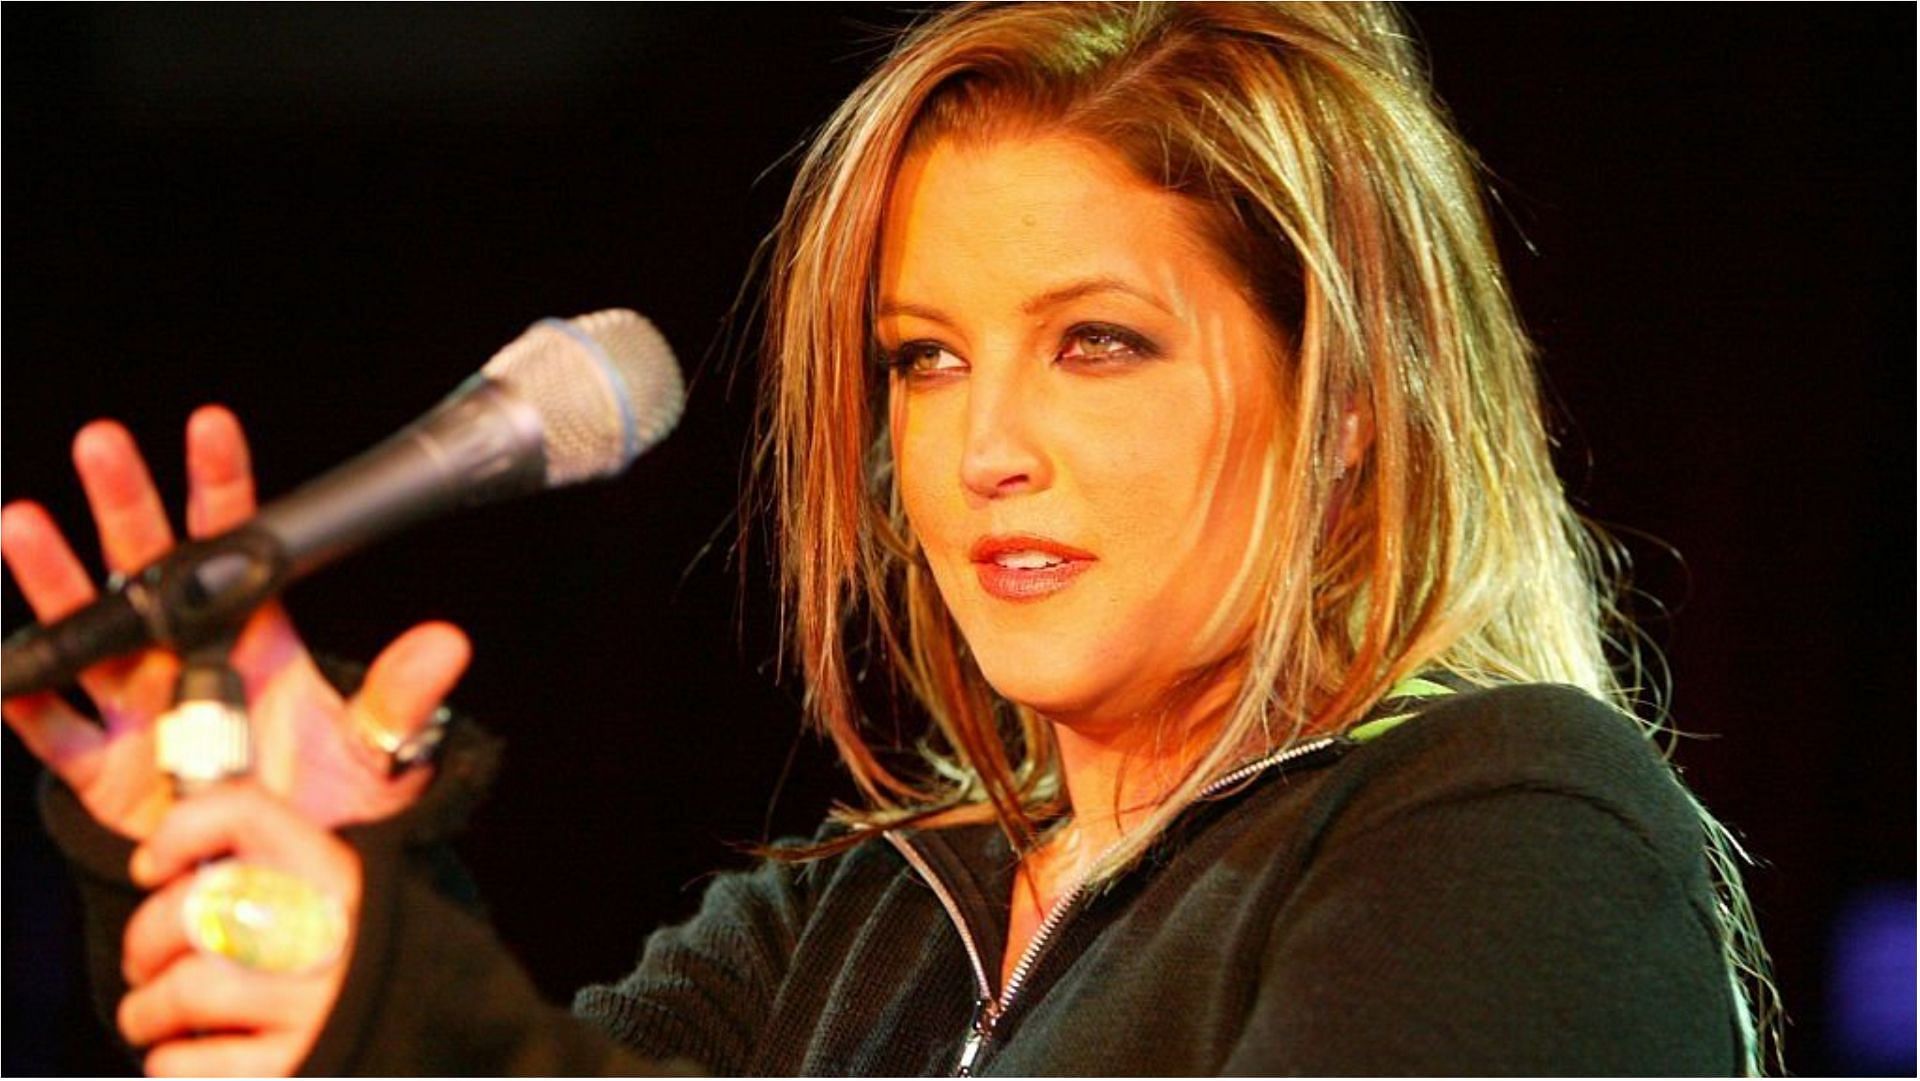 Lisa Marie Presley had to suffer some financial problems after she spent a lot on her lifestyle (Image via Peter Macdiarmid/Getty Images)